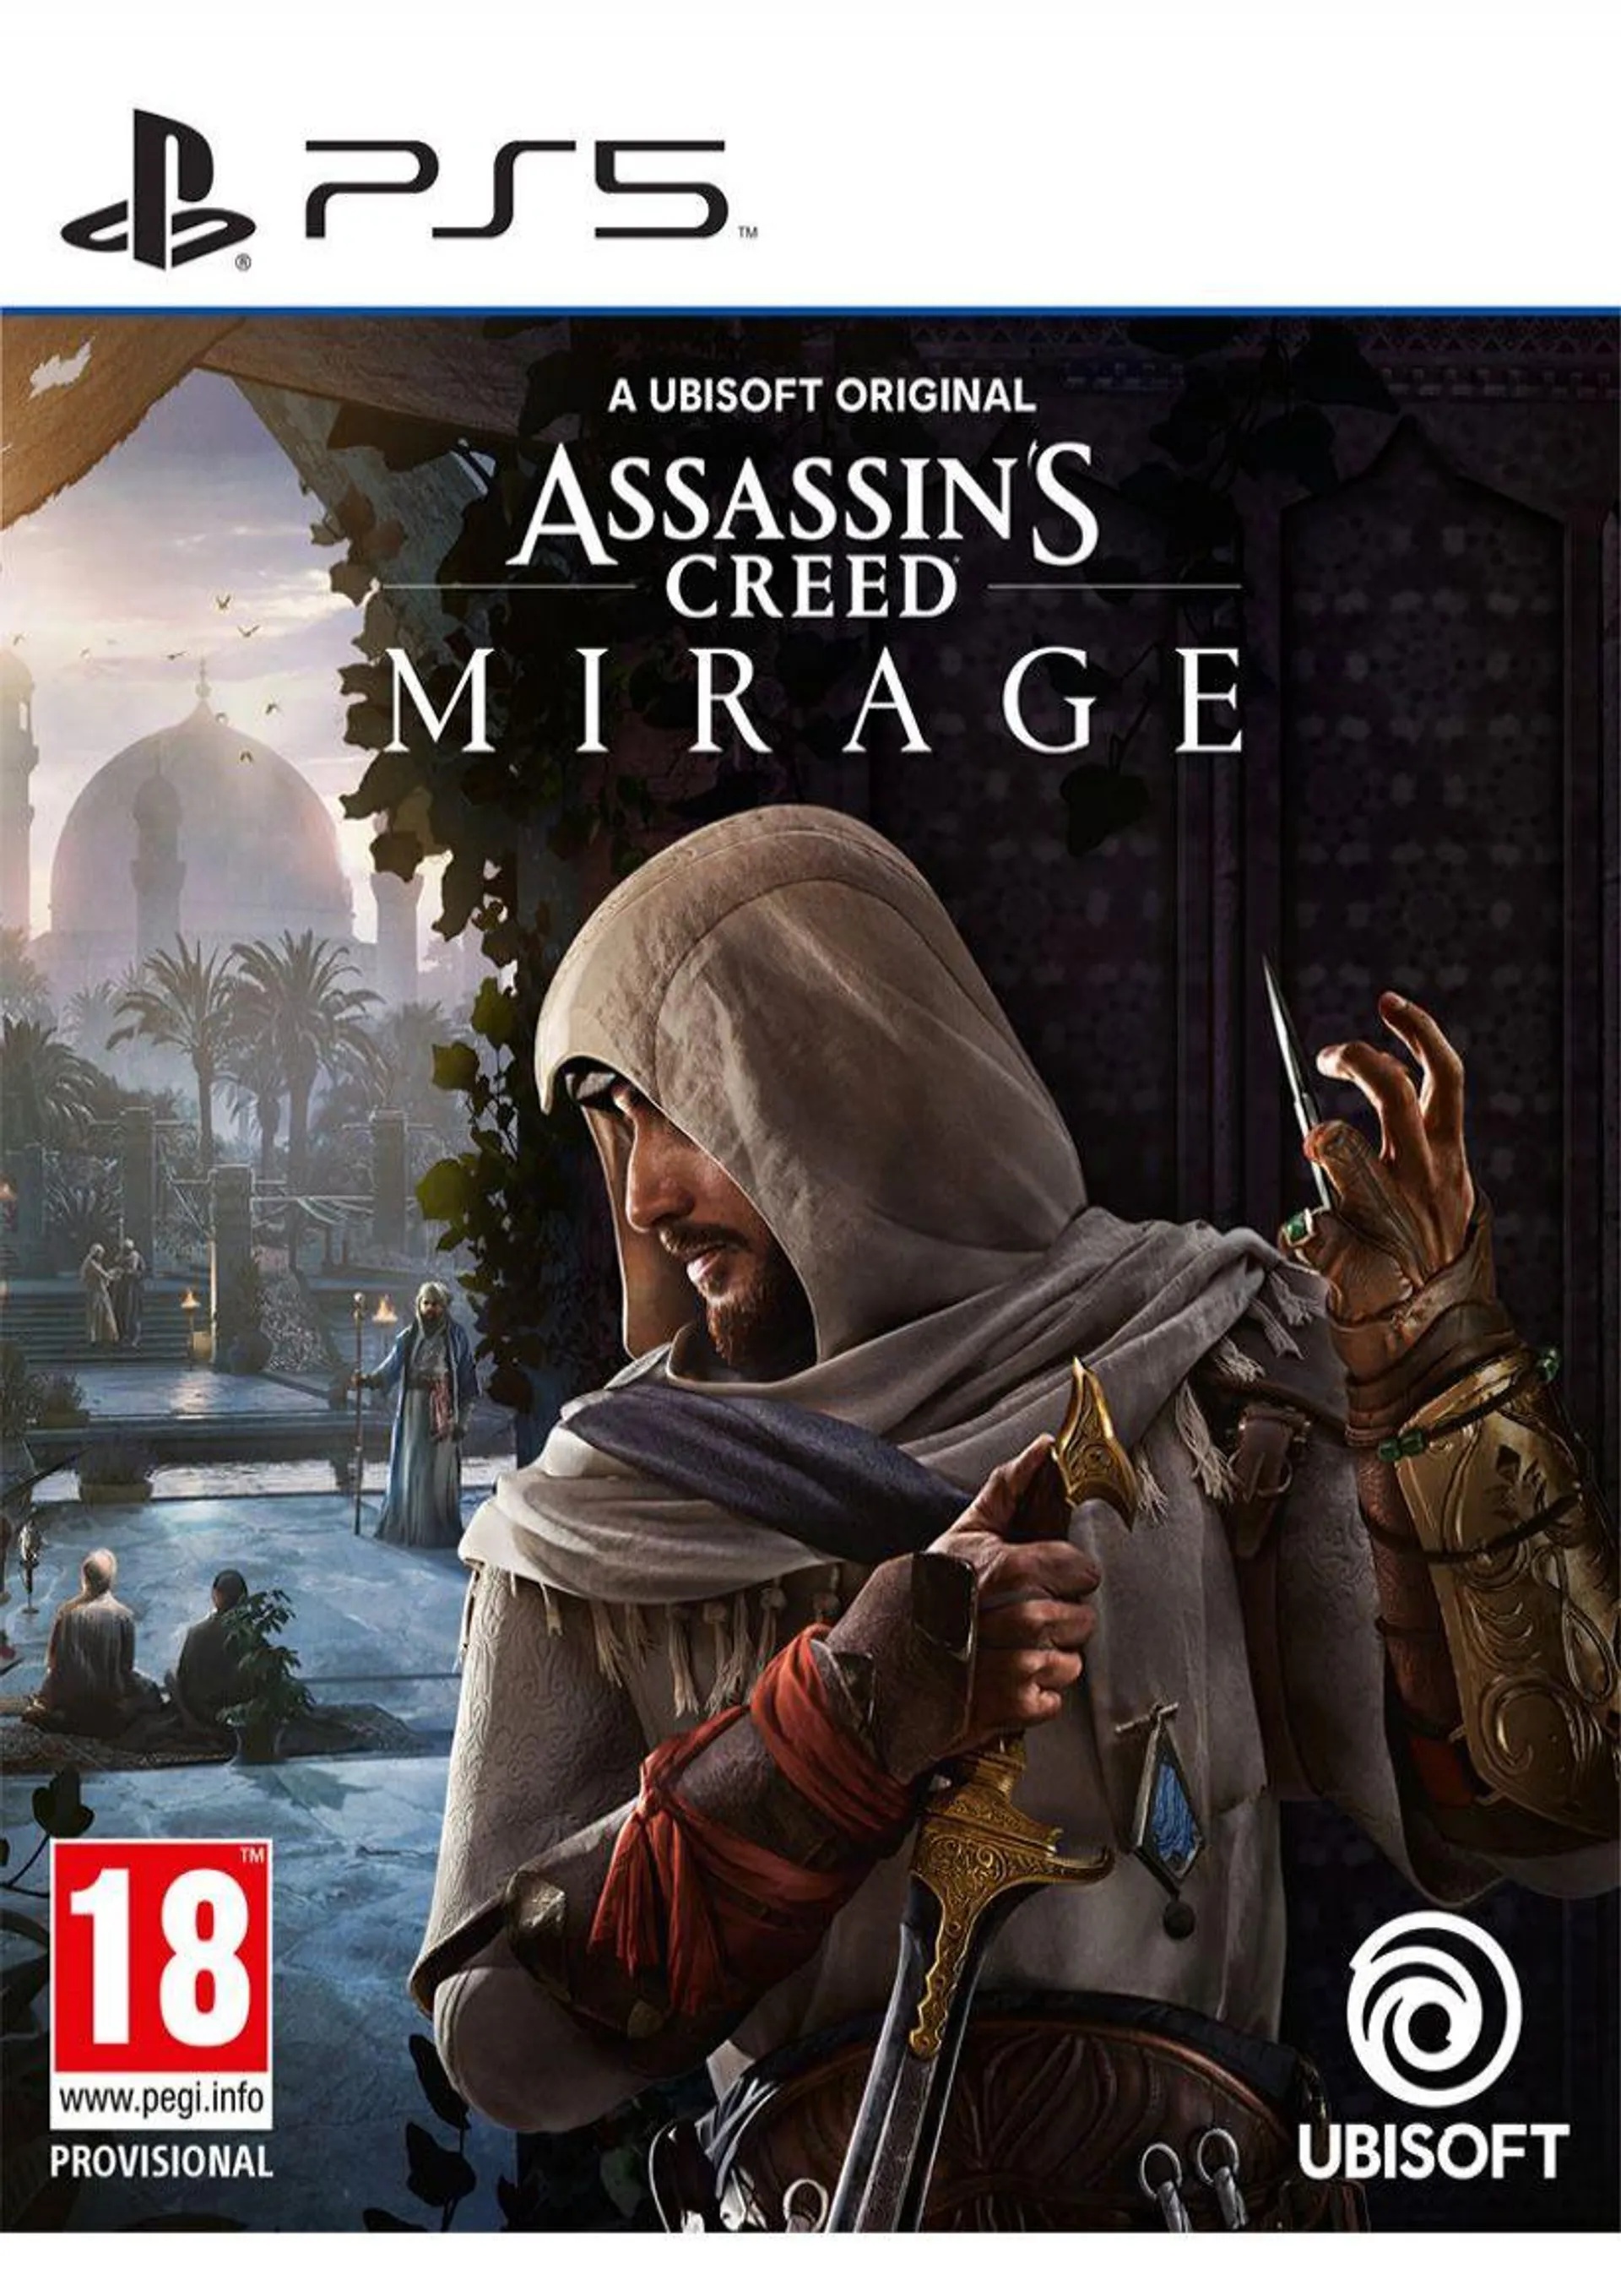 Assassin's Creed Mirage on PlayStation 5